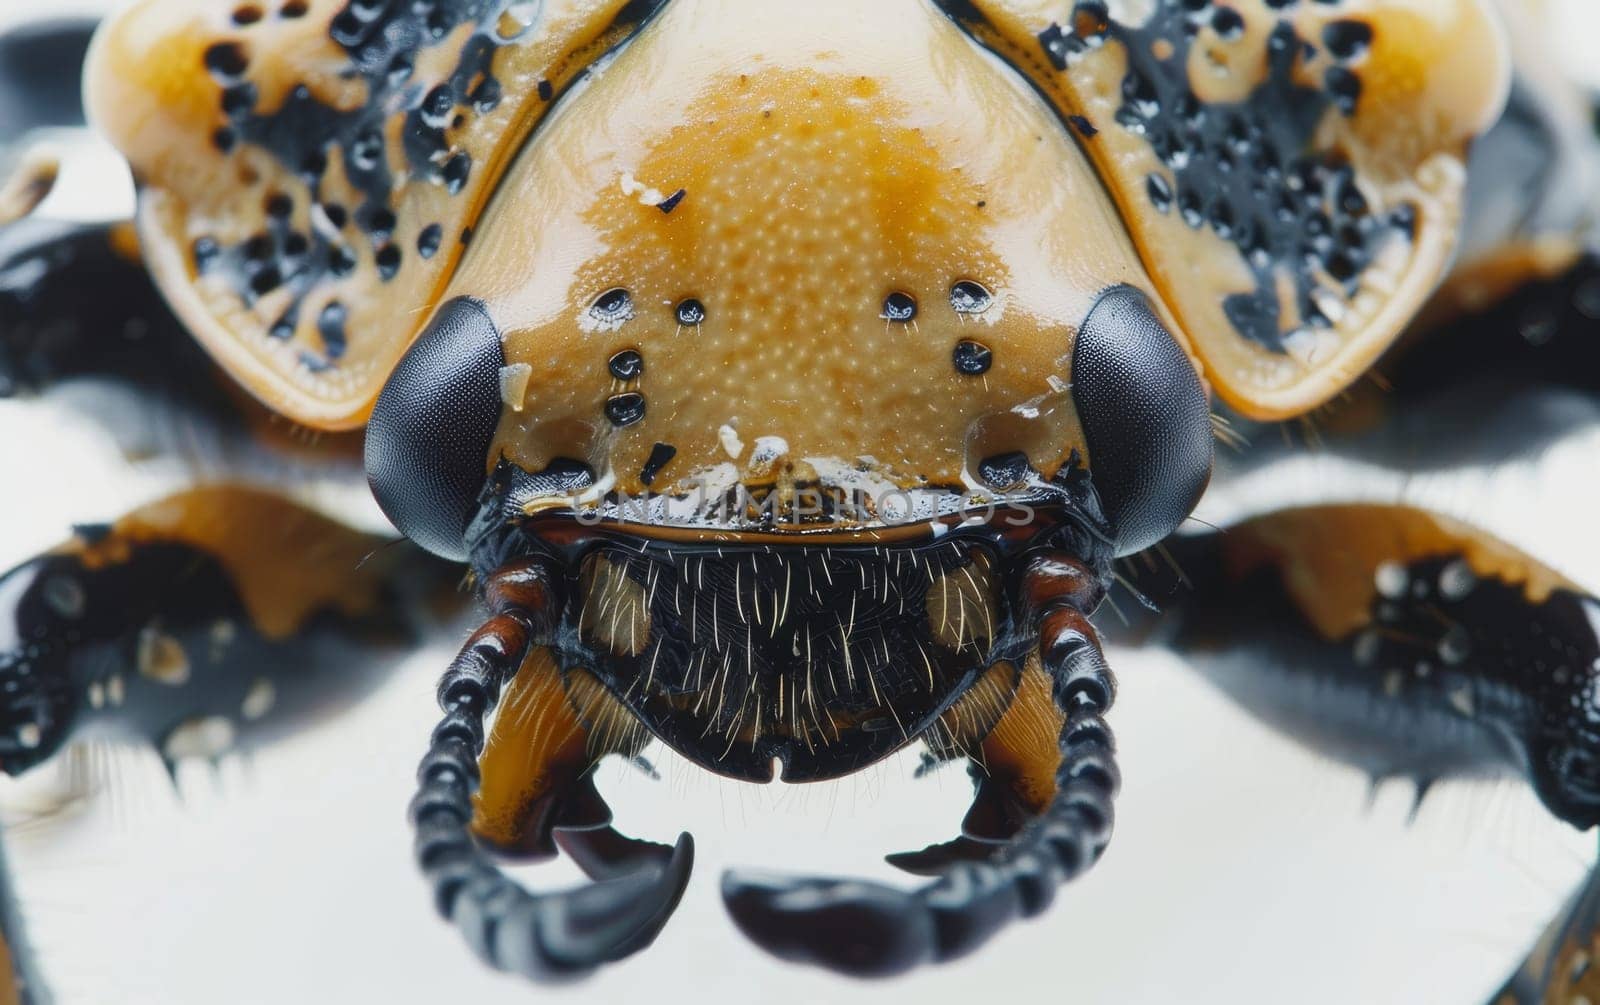 This macro image exhibits a Goliath beetle's pincers, highlighting the impressive mechanics and formidable appearance of its front claws. The design reflects evolutionary perfection.. by sfinks